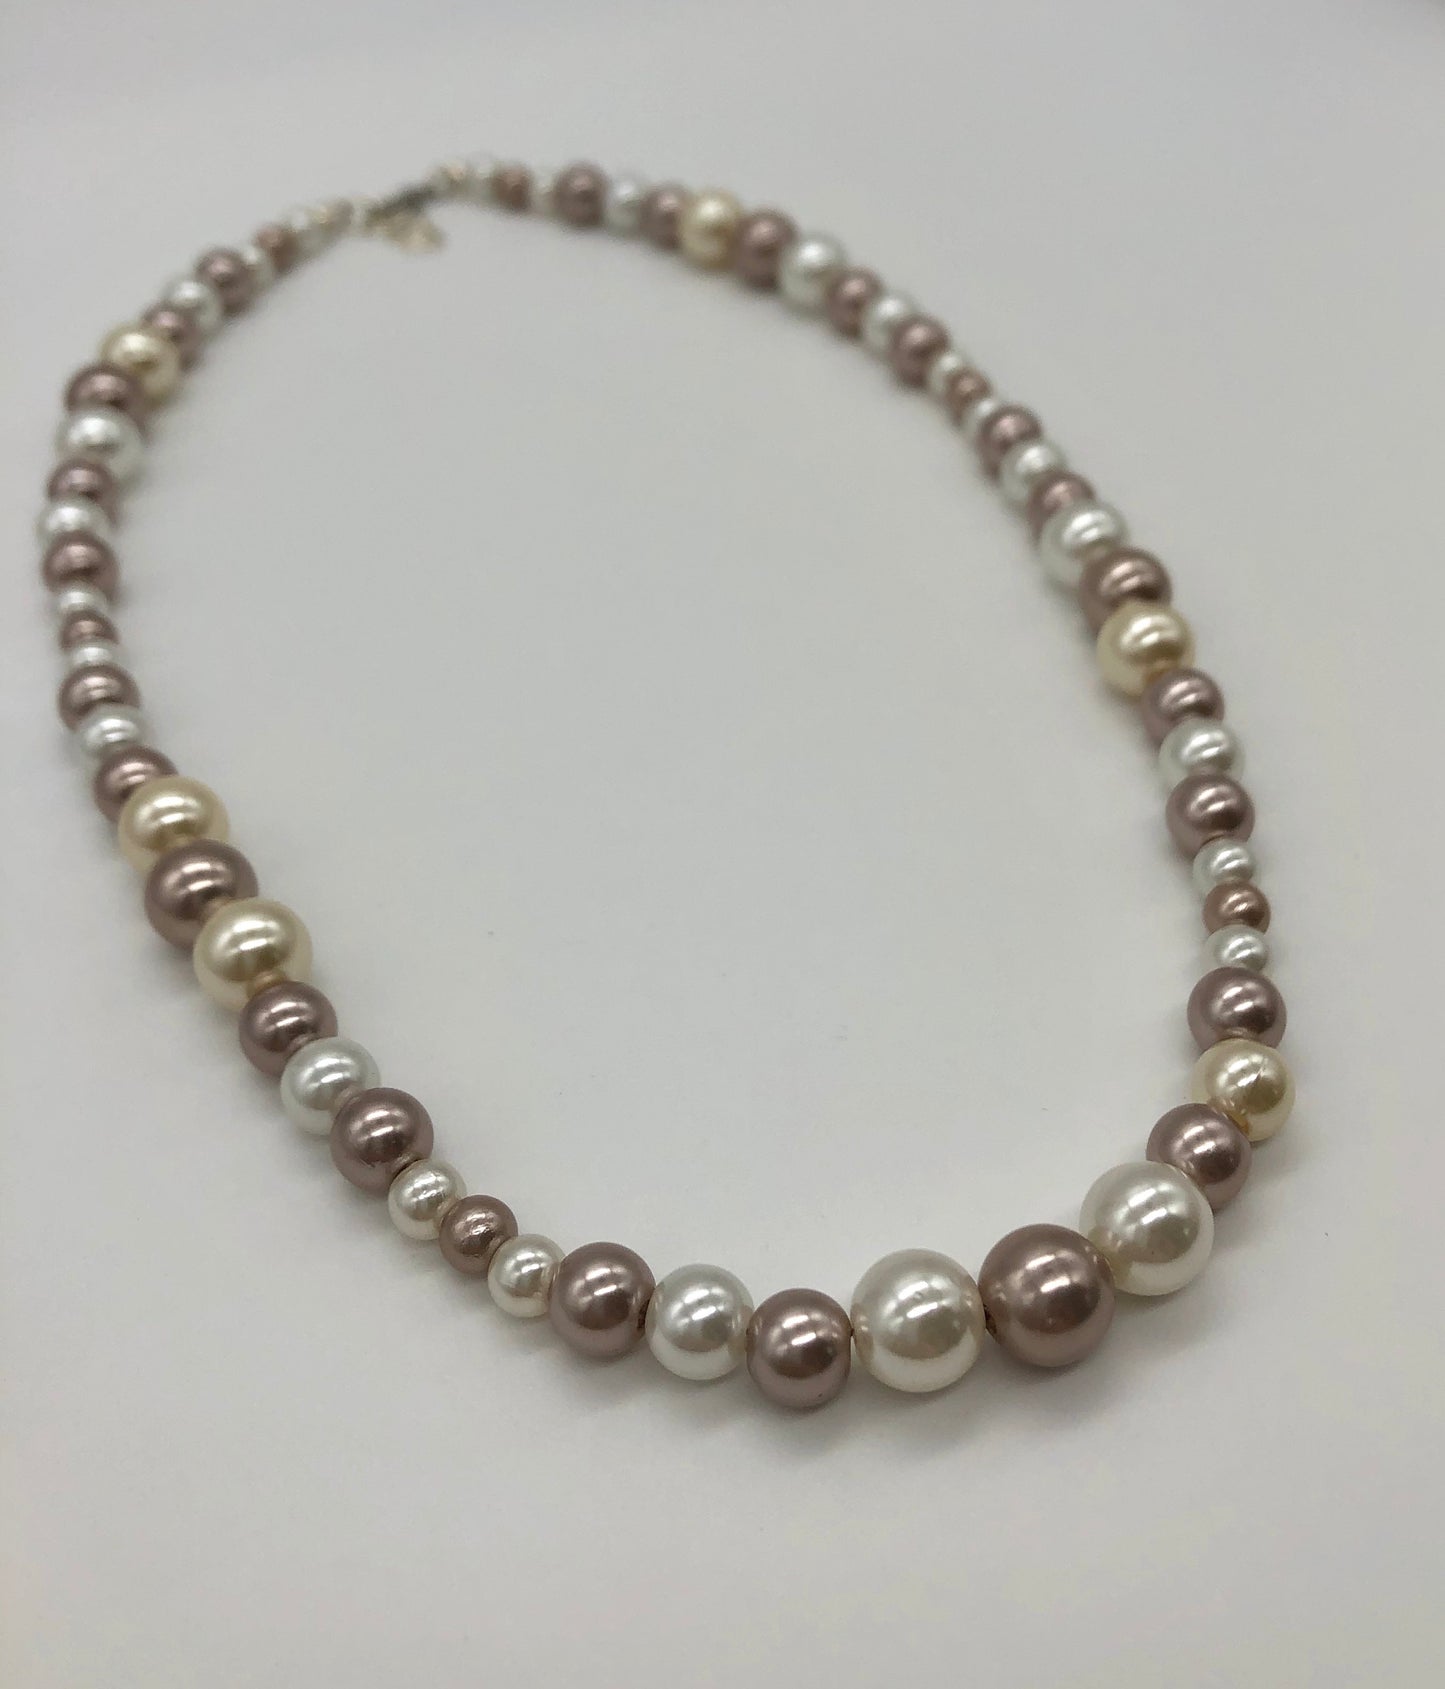 Faux cream and champagne pearl bead necklace